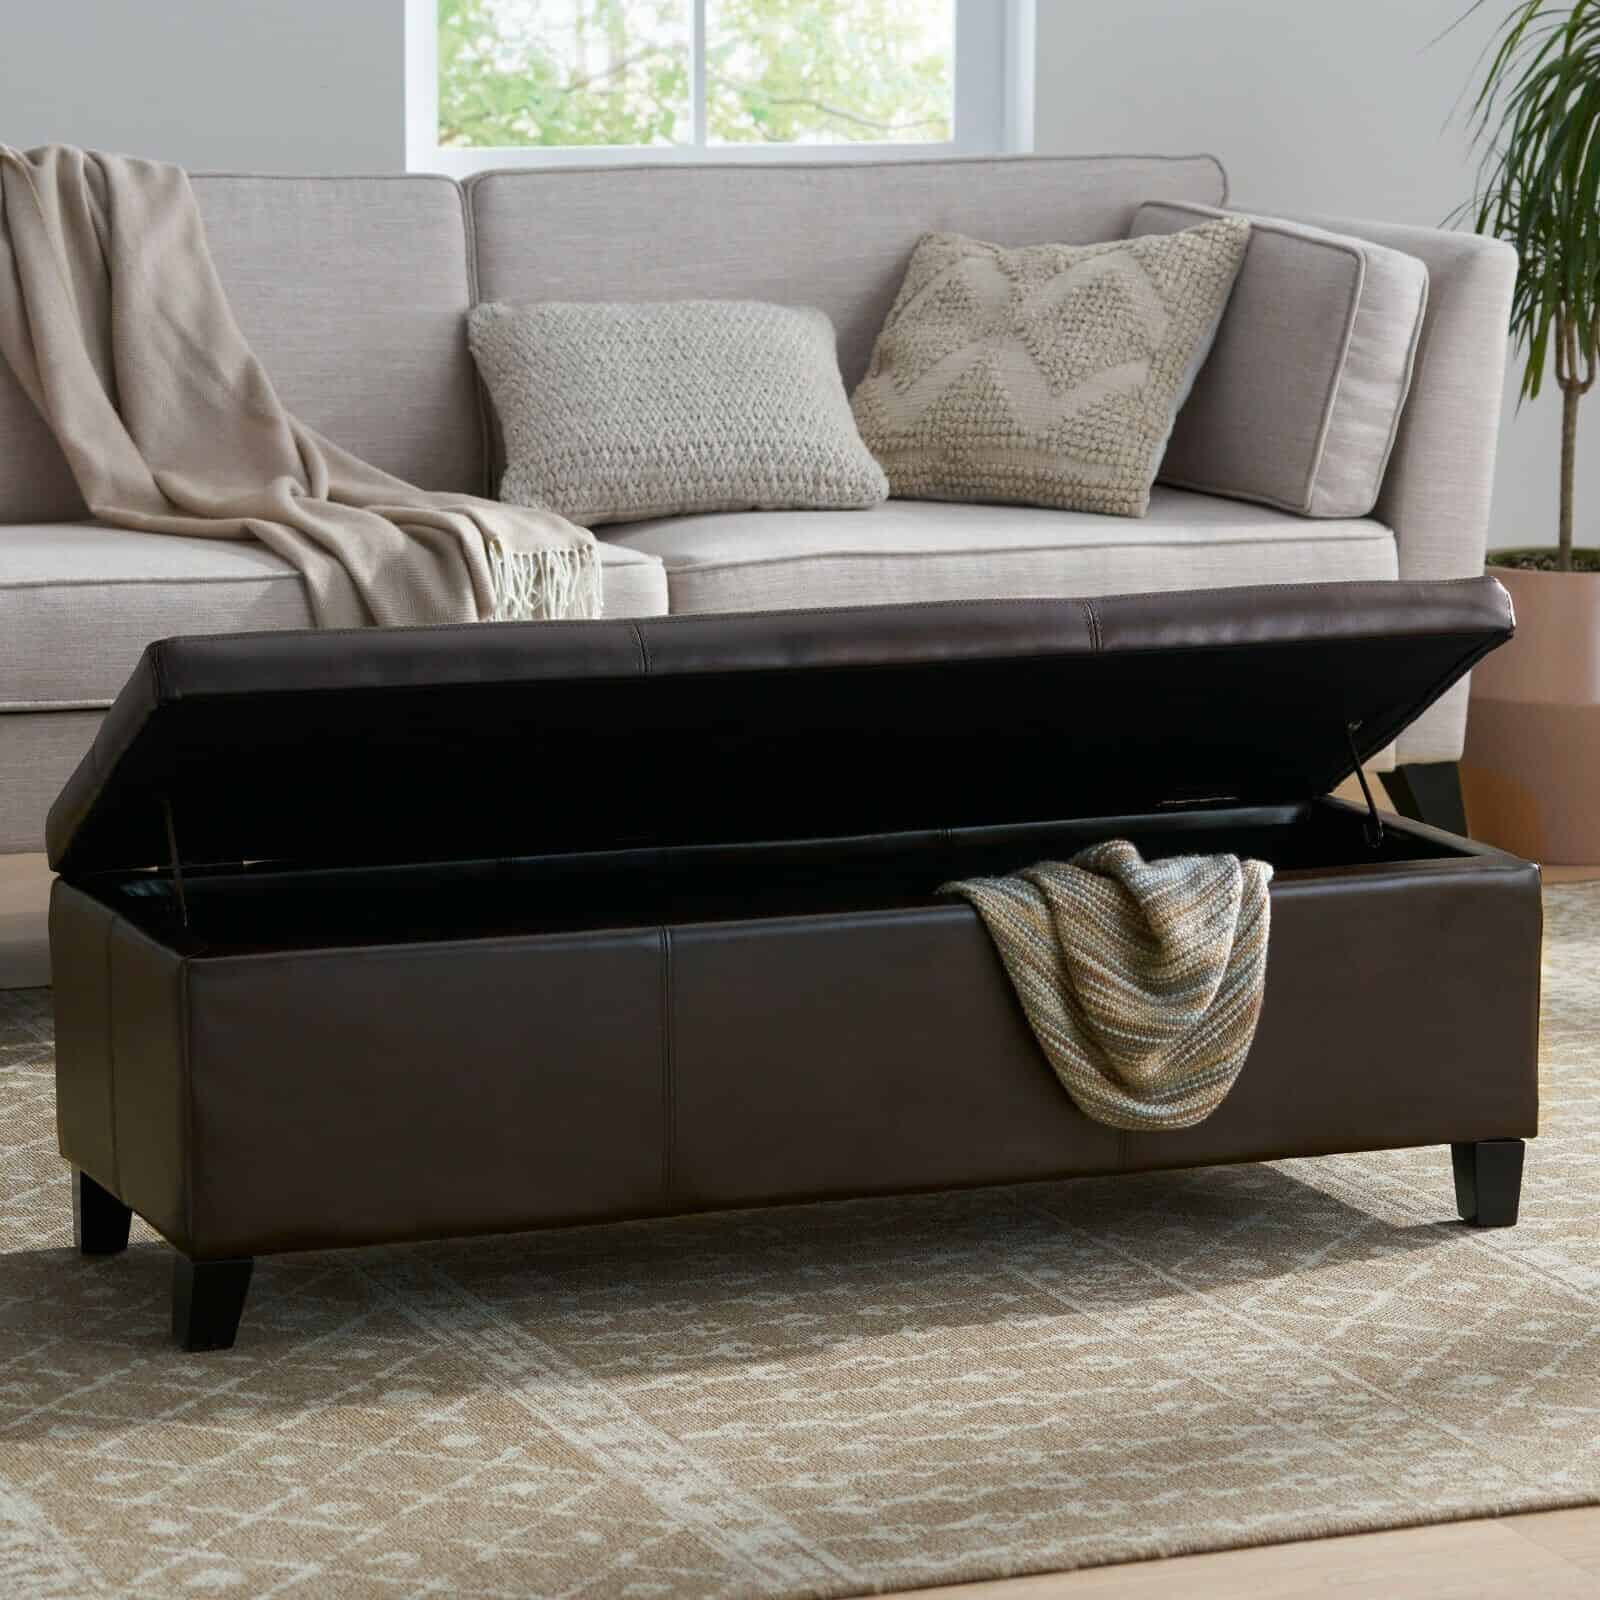 A brown leather storage bench in a living room.